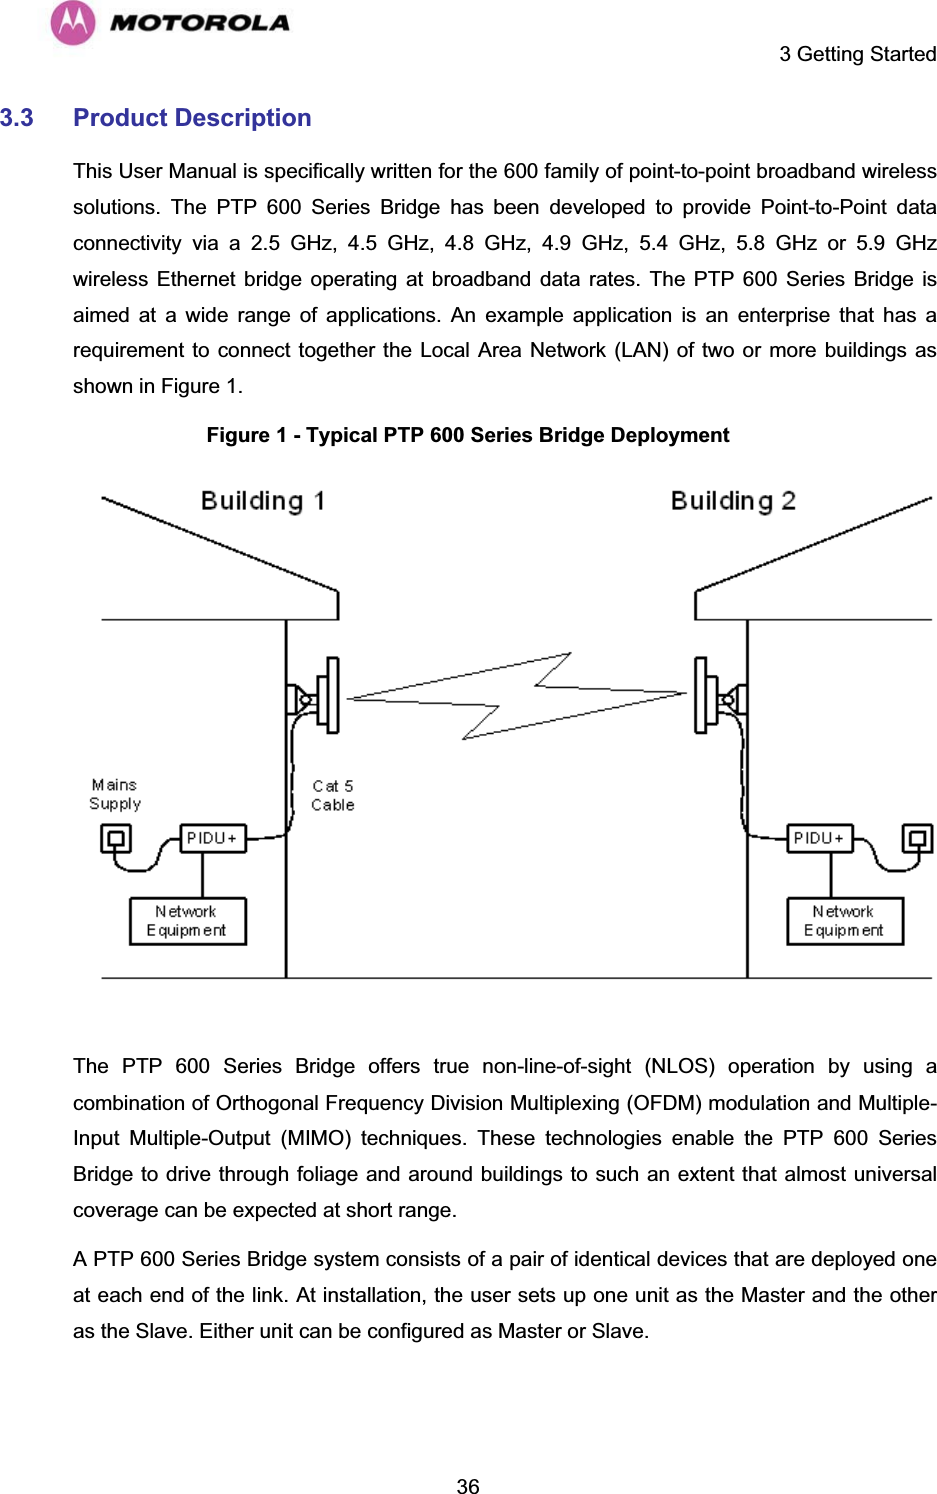     3 Getting Started  363.3 Product Description This User Manual is specifically written for the 600 family of point-to-point broadband wireless solutions. The PTP 600 Series Bridge has been developed to provide Point-to-Point data connectivity via a 2.5 GHz, 4.5 GHz, 4.8 GHz, 4.9 GHz, 5.4 GHz, 5.8 GHz or 5.9 GHz wireless Ethernet bridge operating at broadband data rates. The PTP 600 Series Bridge is aimed at a wide range of applications. An example application is an enterprise that has a requirement to connect together the Local Area Network (LAN) of two or more buildings as shown in Figure 1.  Figure 1 - Typical PTP 600 Series Bridge Deployment   The PTP 600 Series Bridge offers true non-line-of-sight (NLOS) operation by using a combination of Orthogonal Frequency Division Multiplexing (OFDM) modulation and Multiple-Input Multiple-Output (MIMO) techniques. These technologies enable the PTP 600 Series Bridge to drive through foliage and around buildings to such an extent that almost universal coverage can be expected at short range.  A PTP 600 Series Bridge system consists of a pair of identical devices that are deployed one at each end of the link. At installation, the user sets up one unit as the Master and the other as the Slave. Either unit can be configured as Master or Slave.  